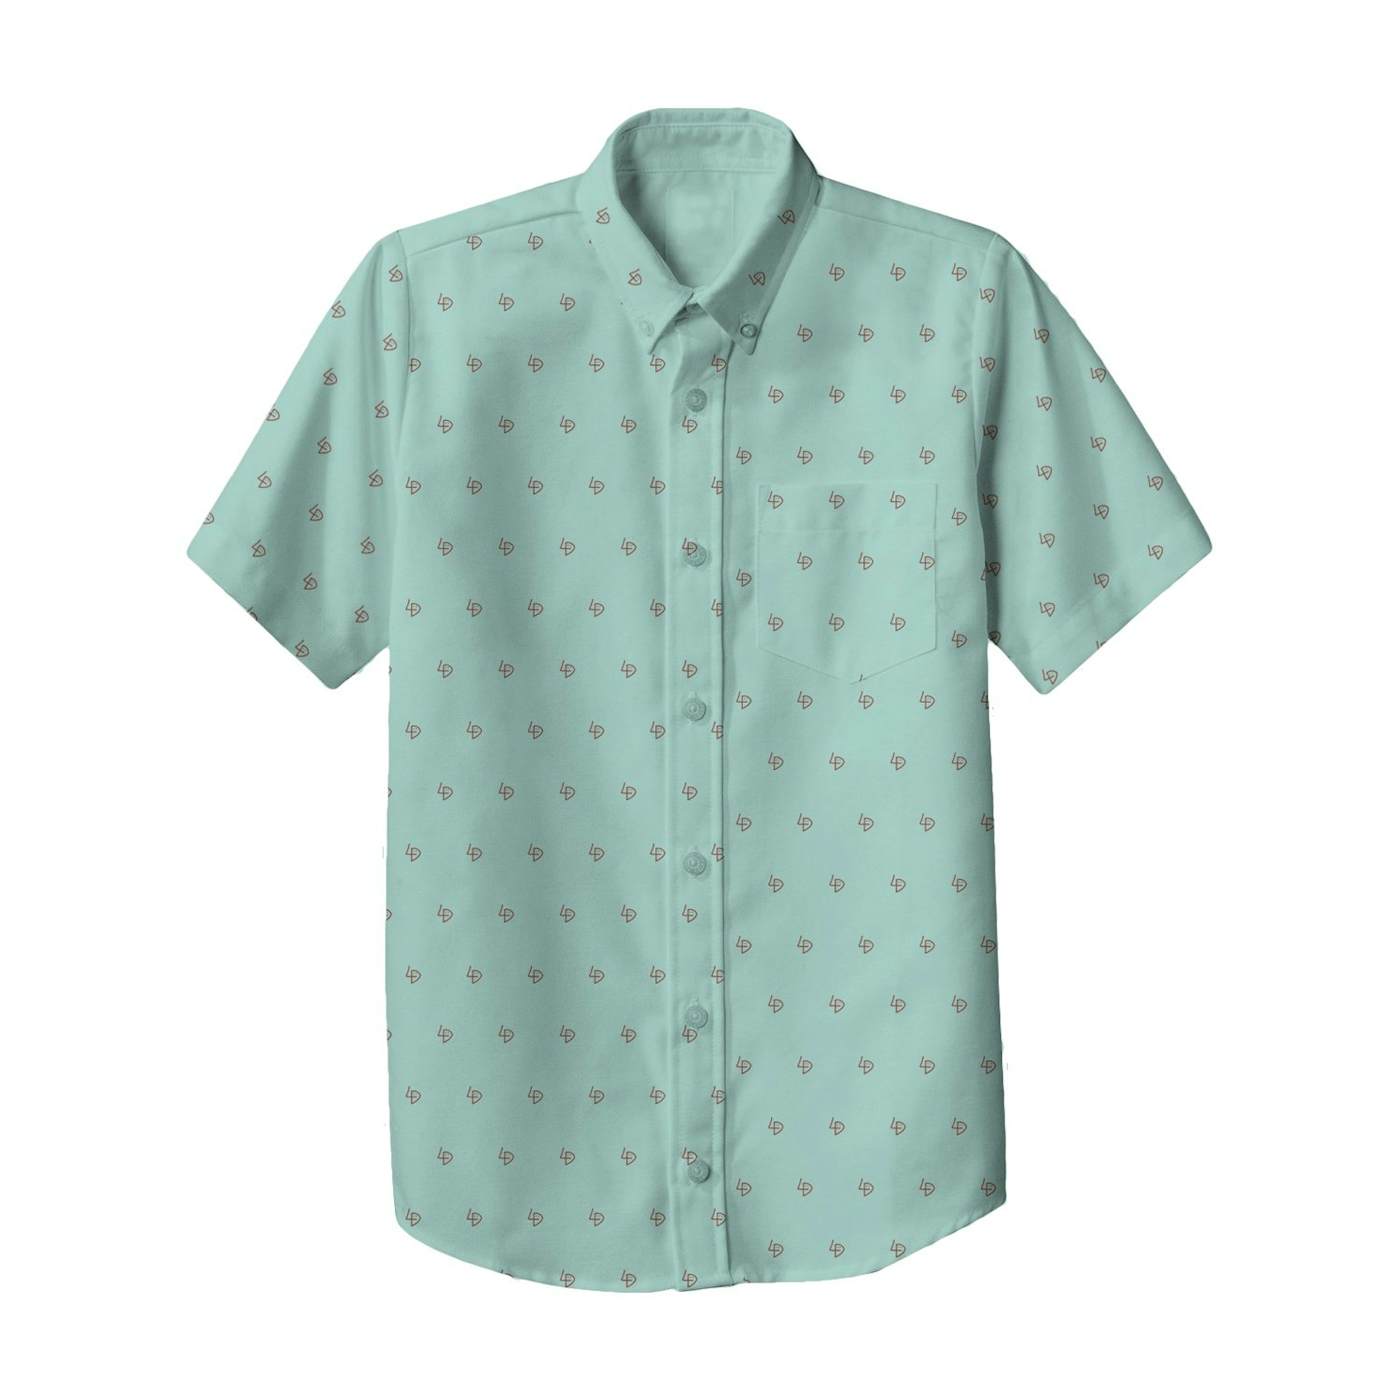 Lil Dicky MINT BUTTON DOWN SHIRT